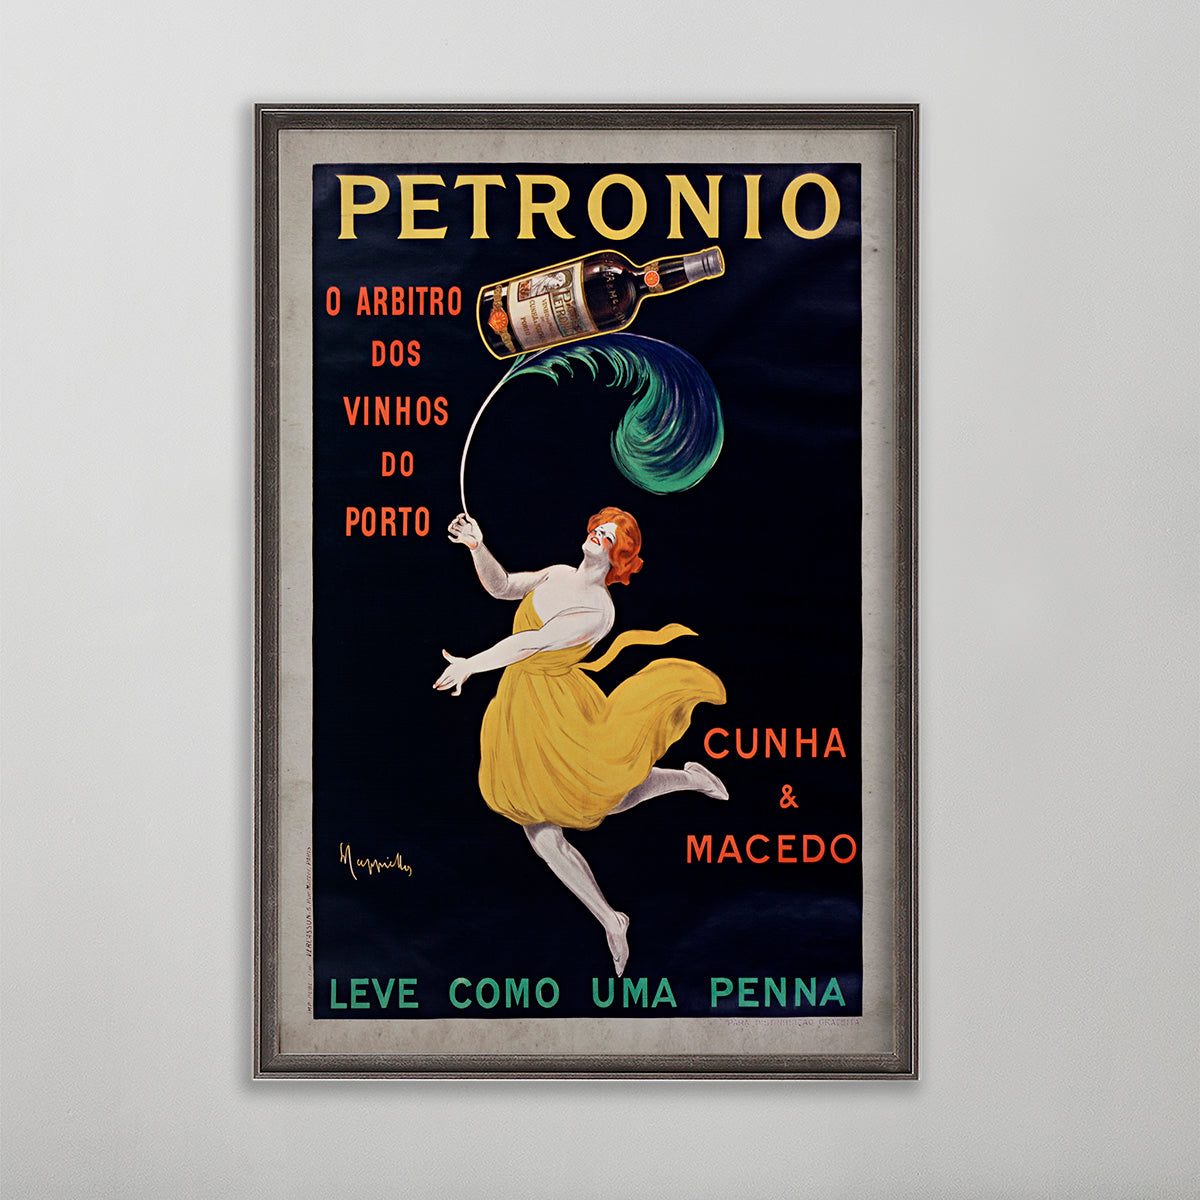 Leve Como Uma Penna, Petronio. Vintage poster wall art by leonetto cappiello. Woman wearing yellow dress holding a feather.